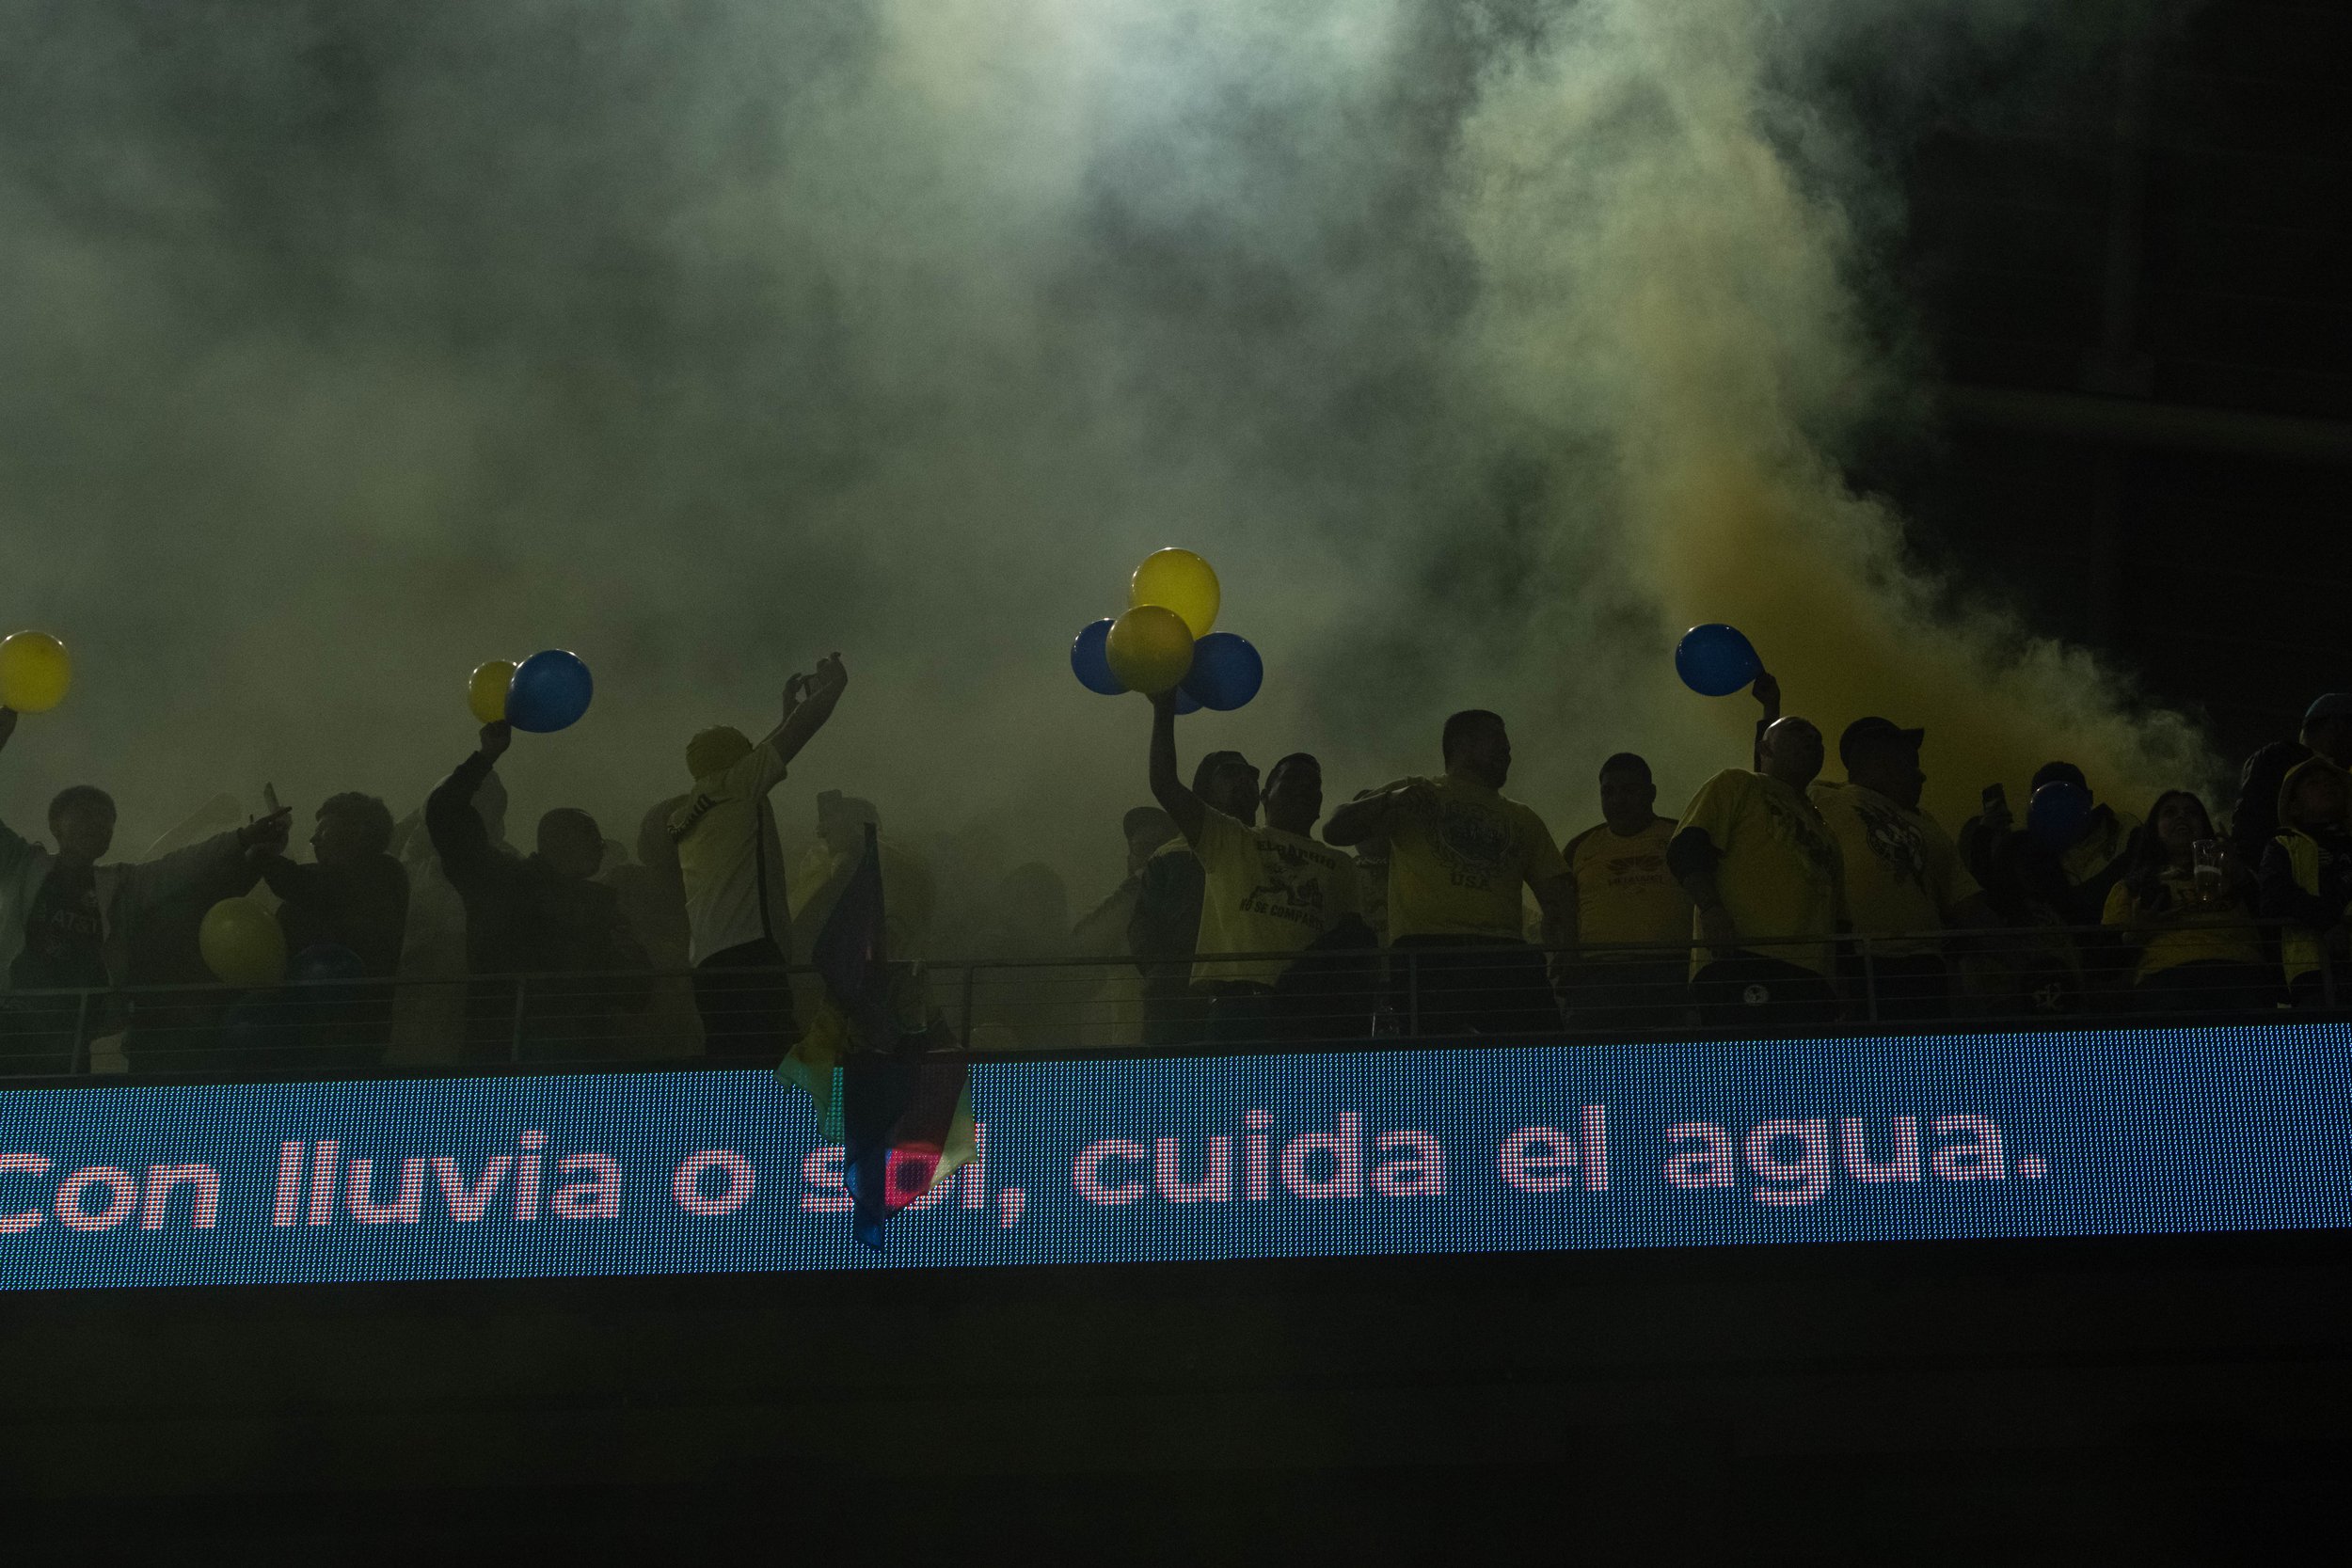  Club America Femenil fans within the yellow smoke they realeased during the international freindly against the home team Angel City FC on Wed. March 8, 2023 at BMO Stadium in Los Angeles, Calif. (Danilo Perez | The Corsair) 